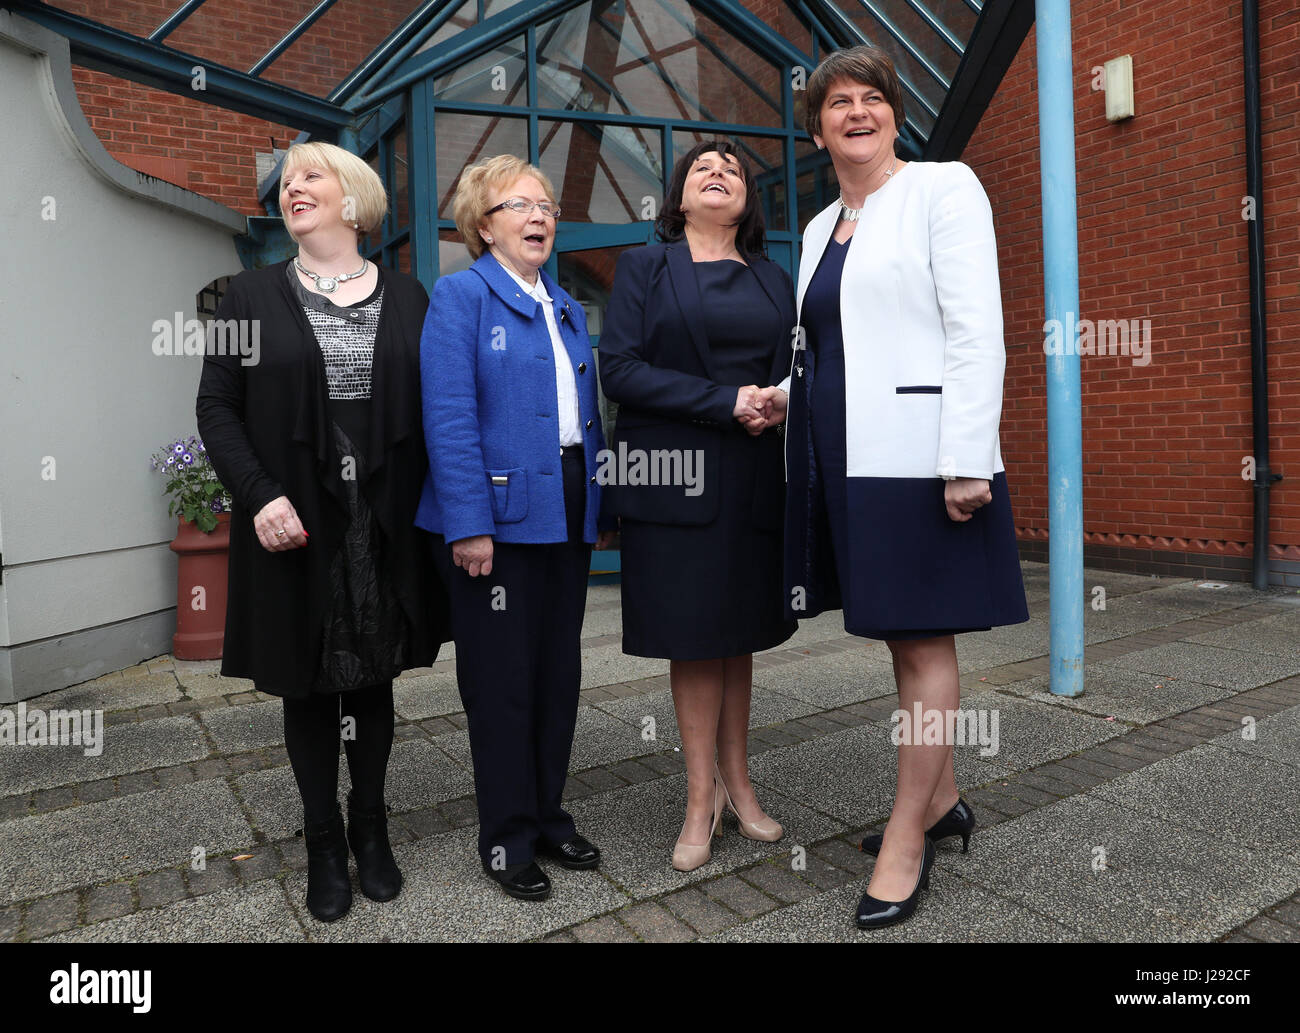 DUP leader Arlene Foster (right) meets Theresa McAllister (left), Deputy Principal Sister Francis (second left) and Principal Fiona McAlinden (second right), at Our Lady's Grammar School in Newry. Stock Photo